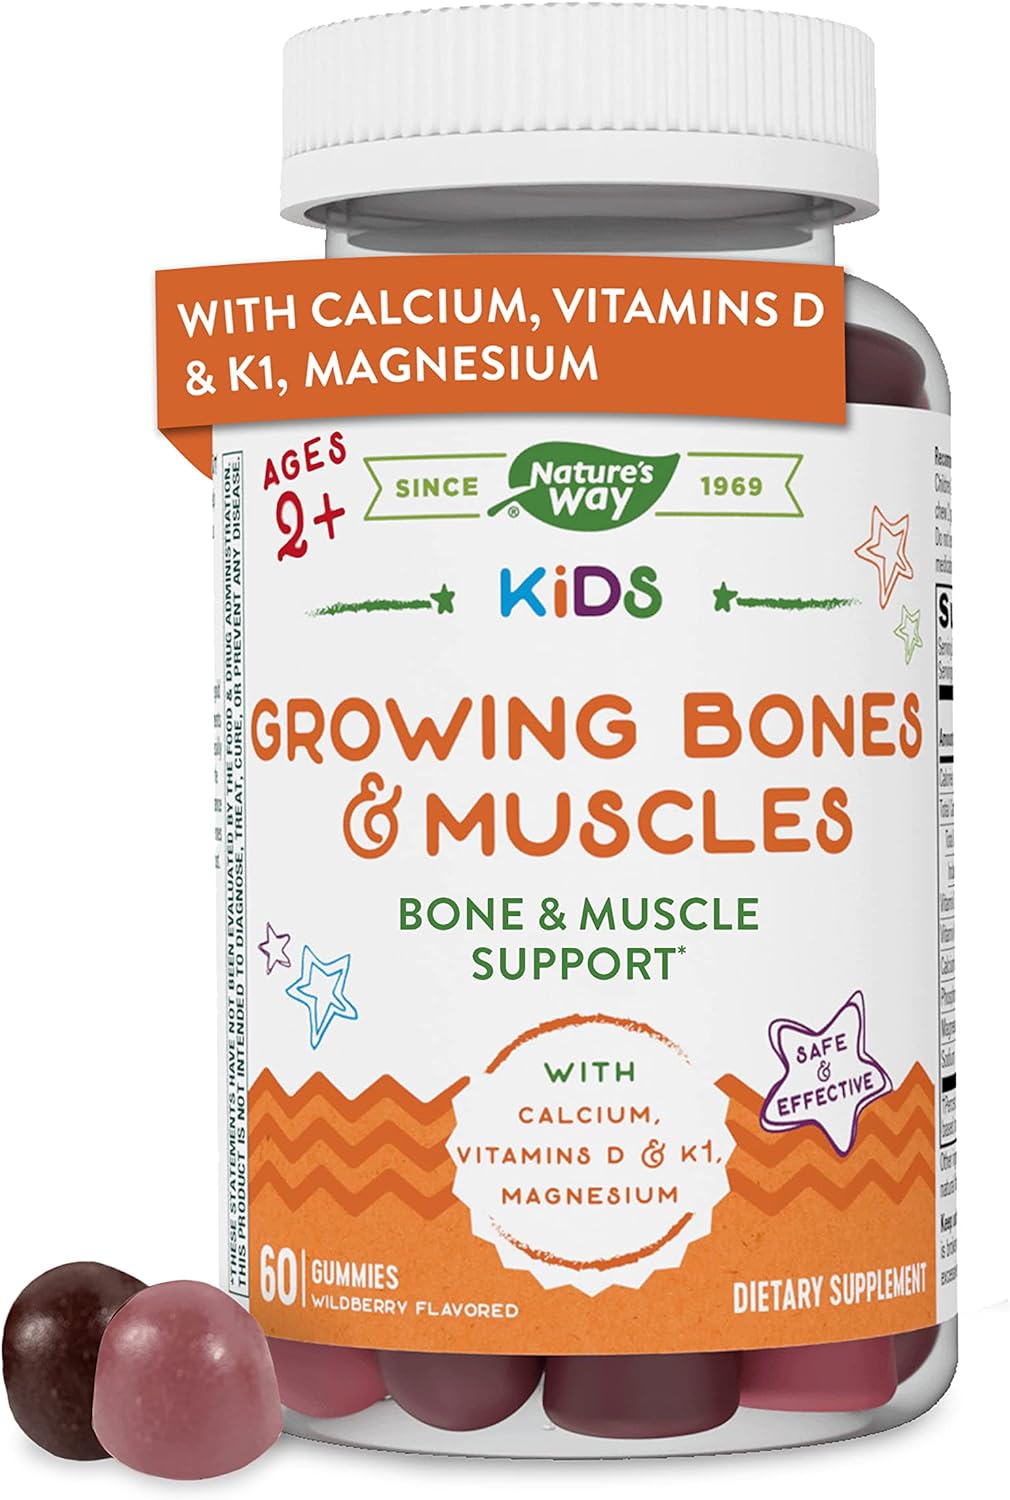 Natures Way Kids Growing Bones  Muscles With Calcium  Vitamin D, Ages 2 And Over, Wildberry Flavored, 60 Gummies